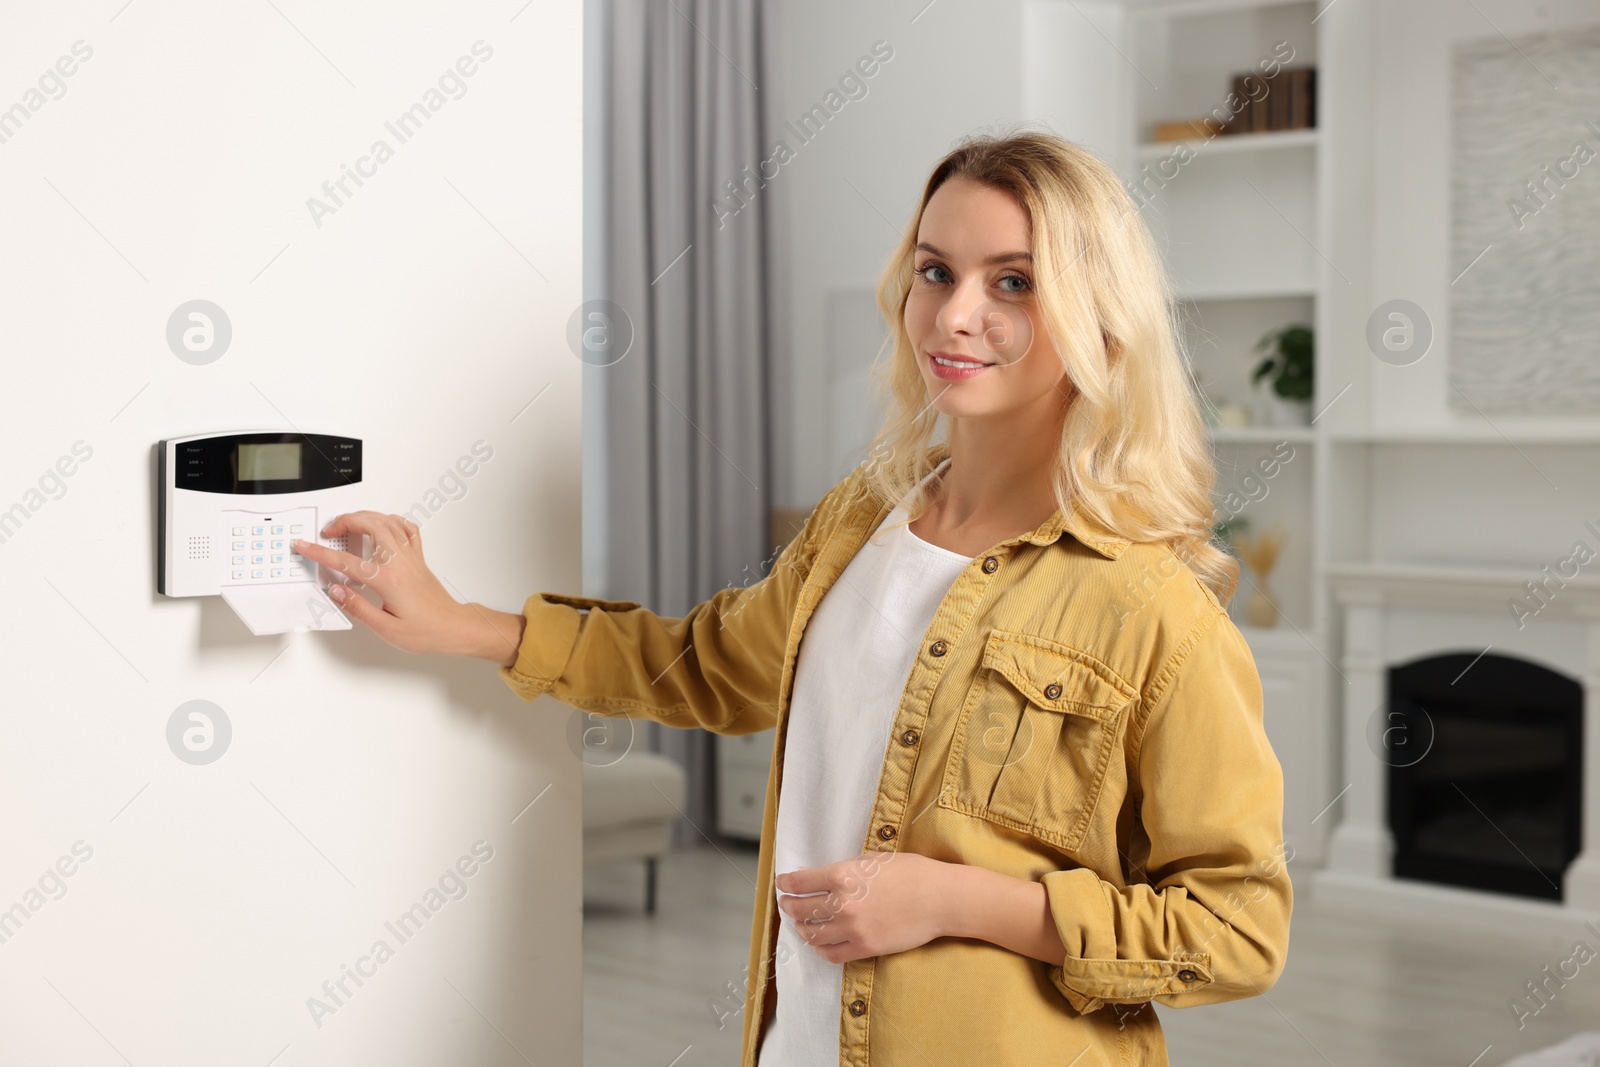 Photo of Woman entering code on home security system in room